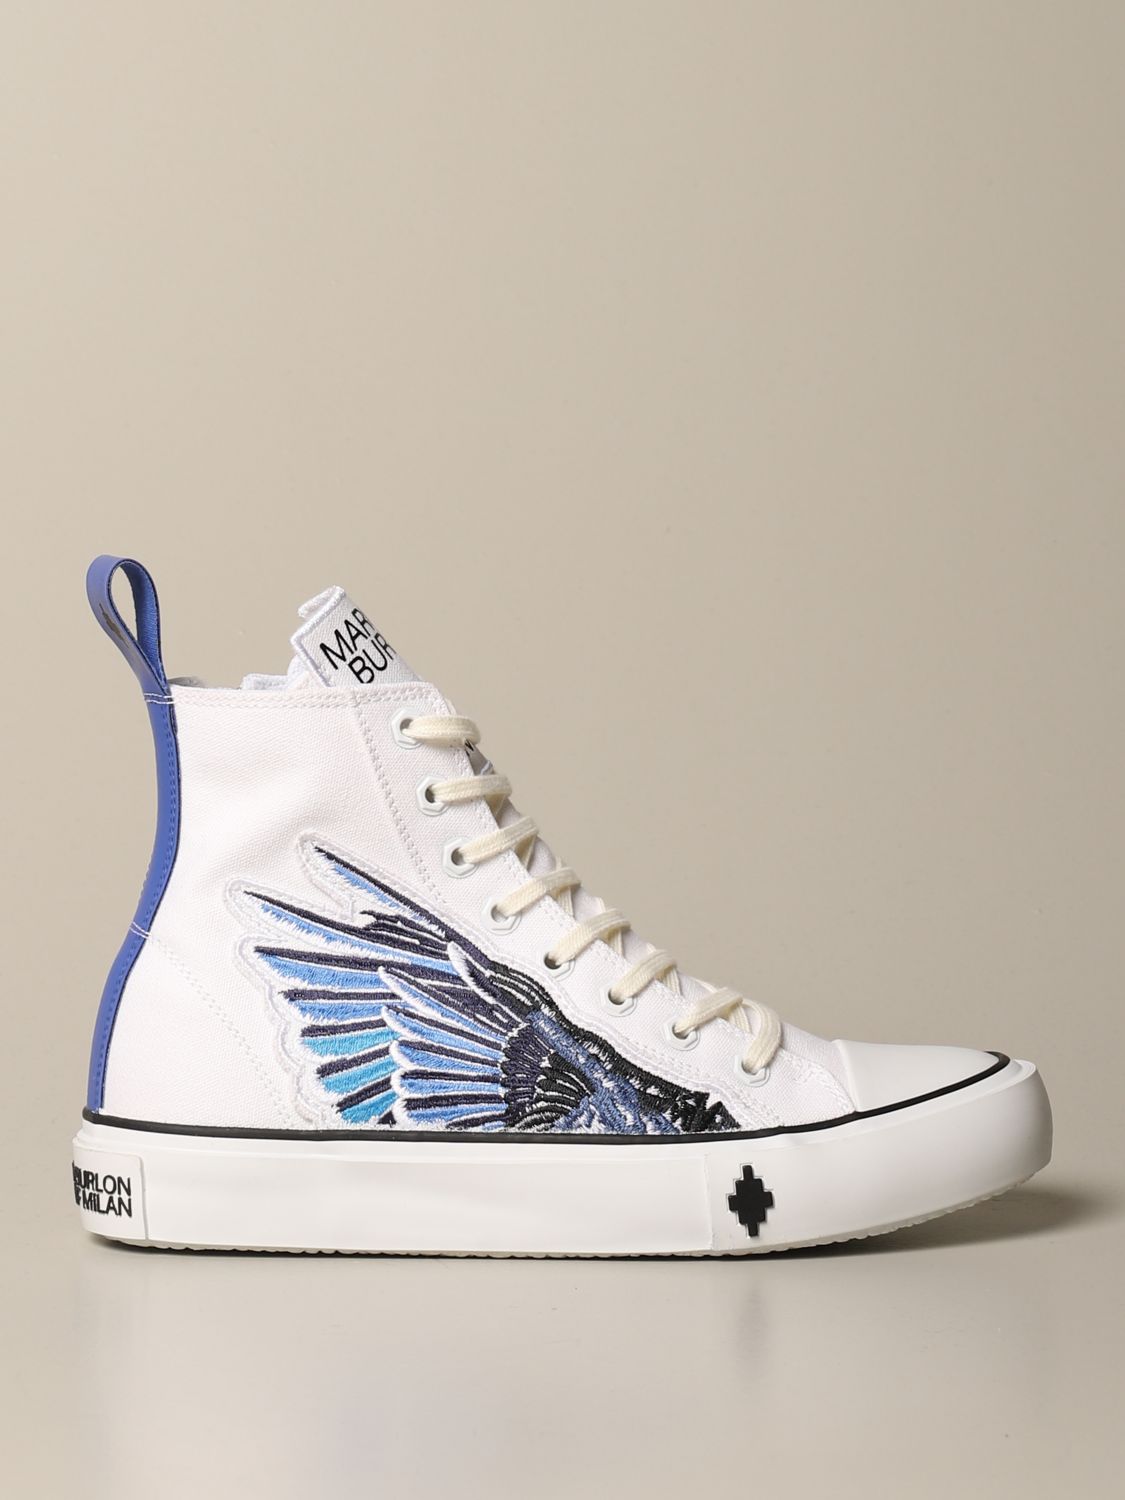 grus fraktion Inhalere MARCELO BURLON: sneakers in canvas and leather with wings | Sneakers  Marcelo Burlon Men White | Sneakers Marcelo Burlon CMIA085E20FAB001  GIGLIO.COM